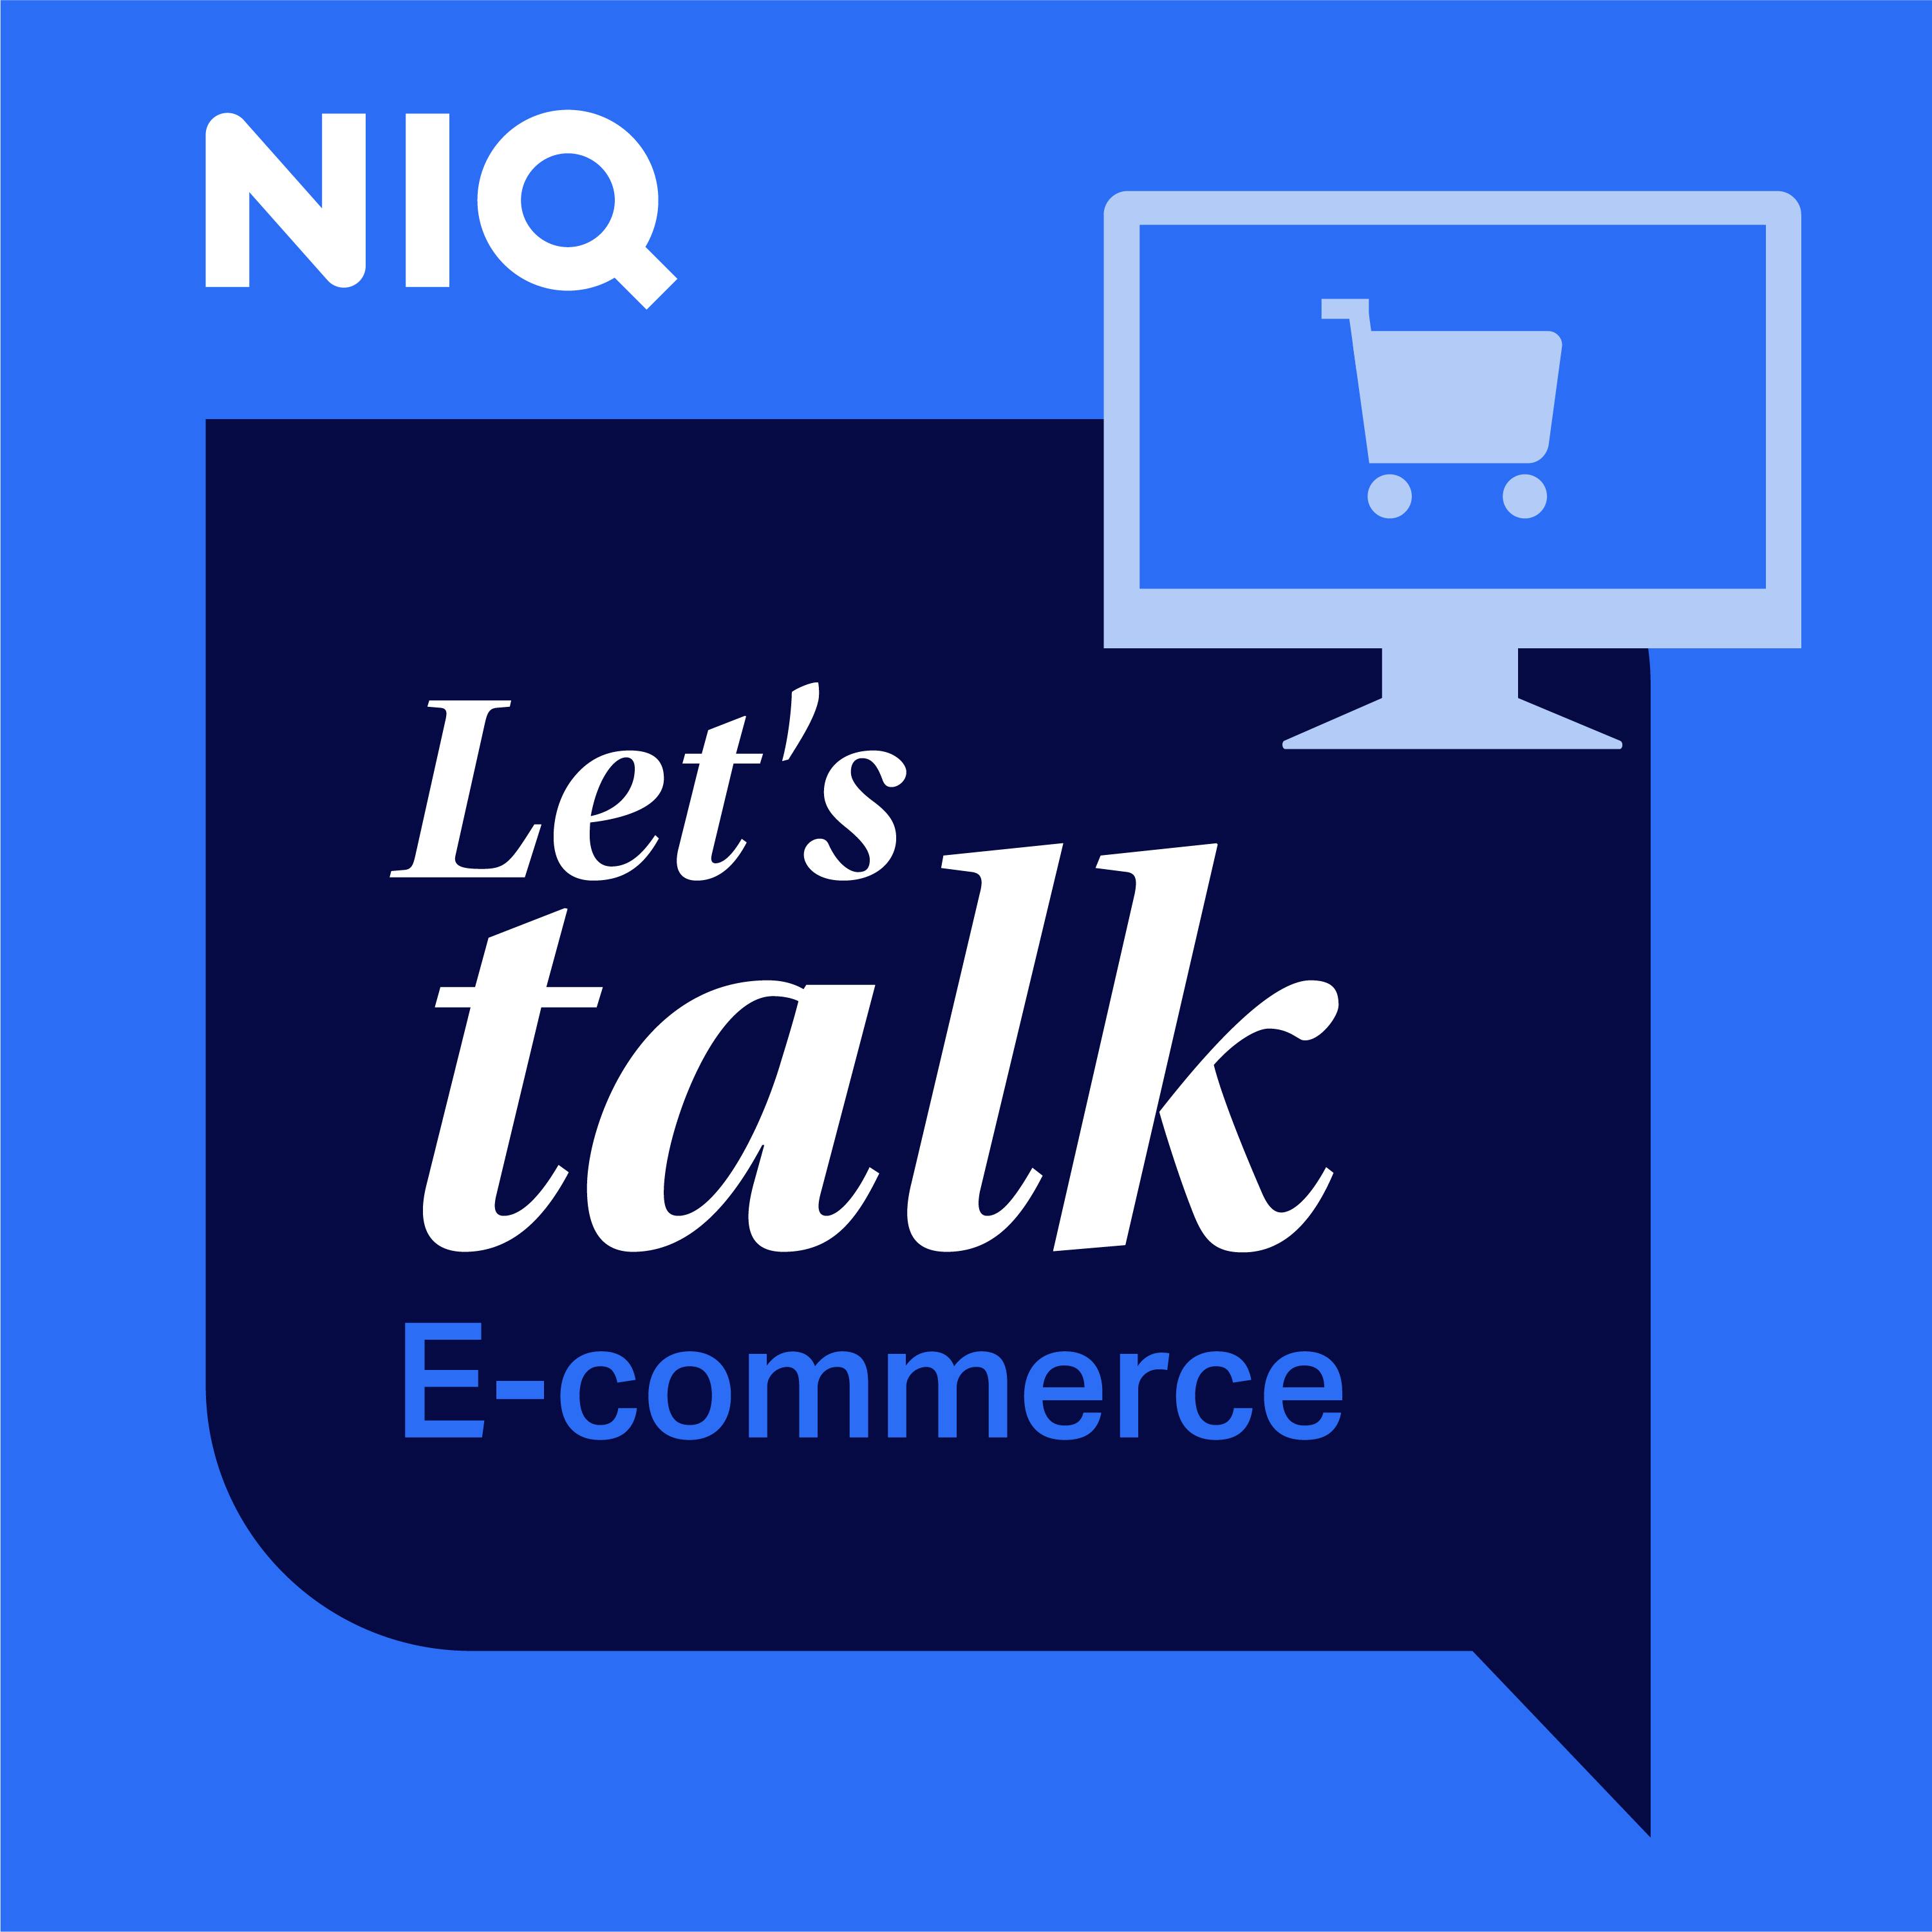 Episode #2 - Omnishopping is the future